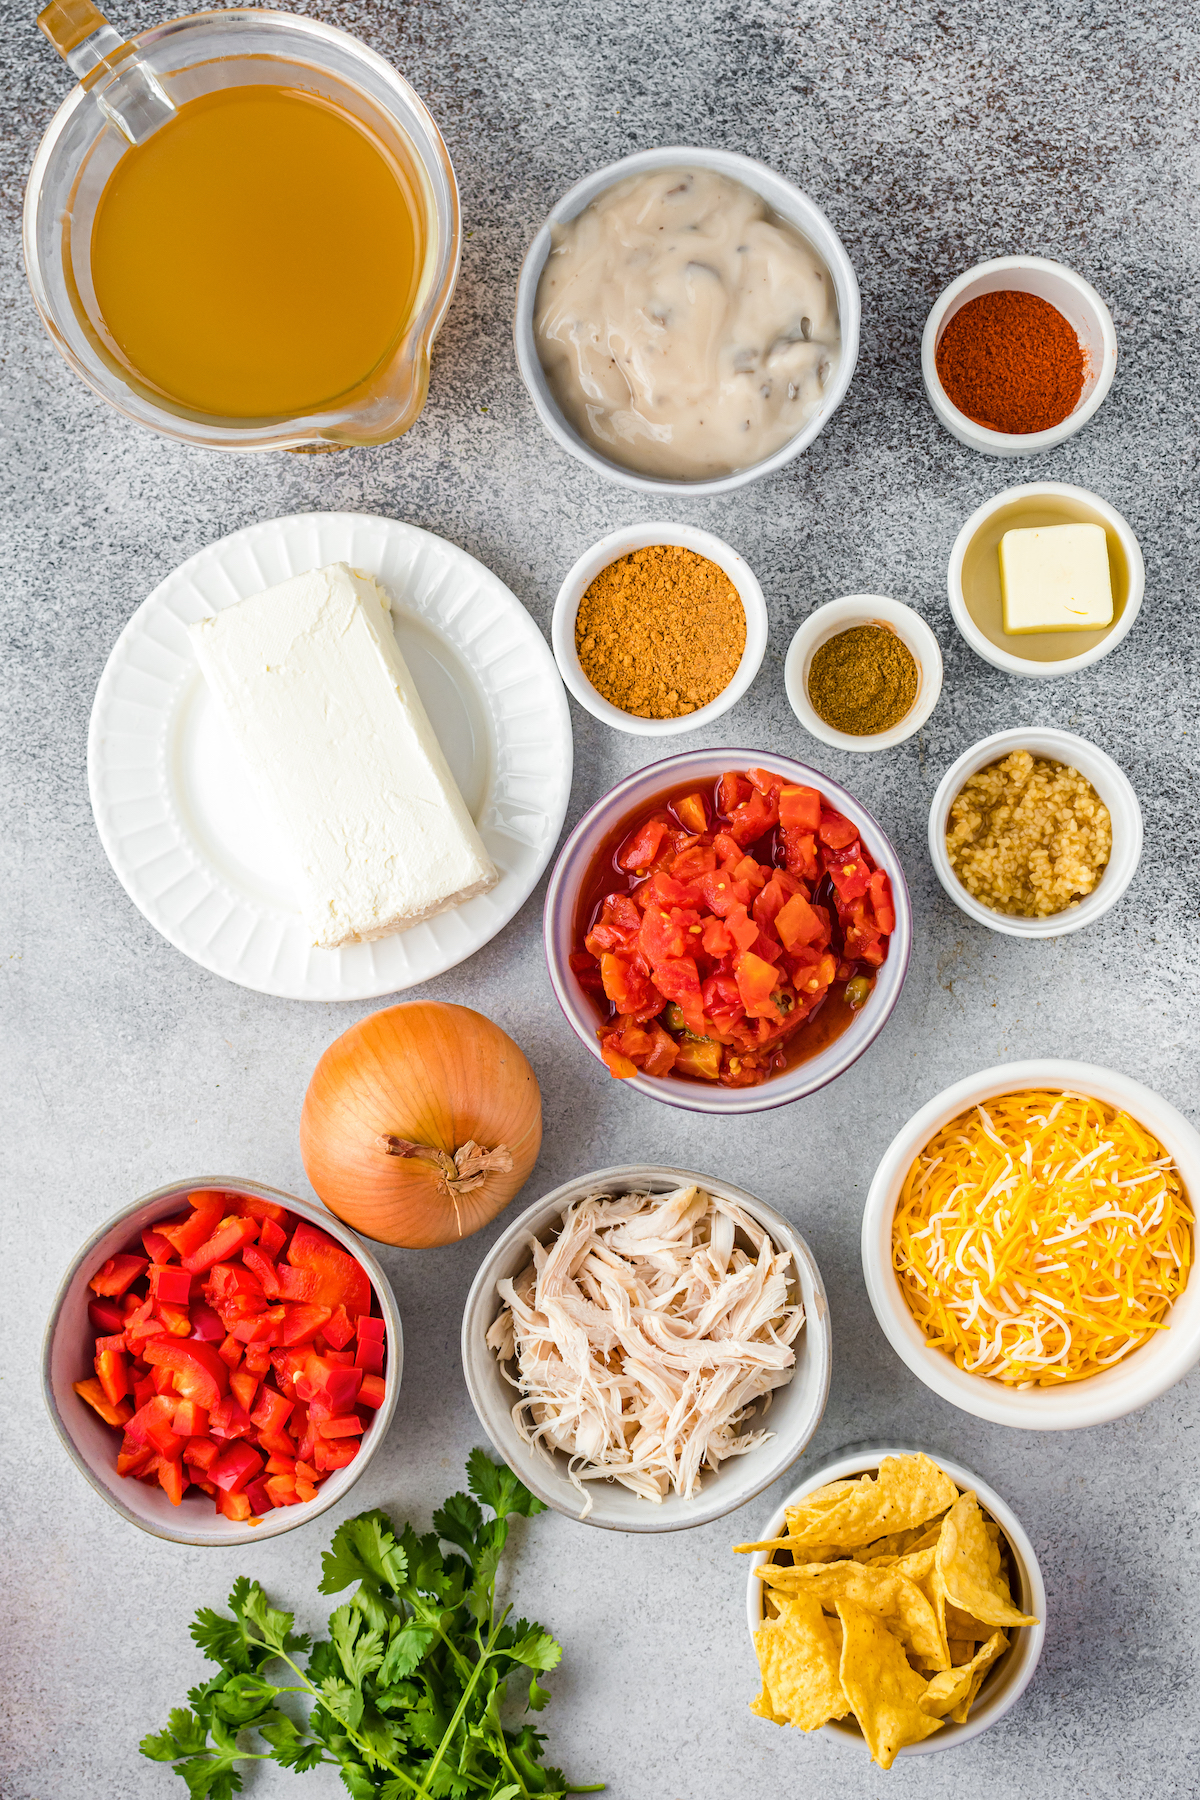 Clockwise from top left: Chicken broth, cream of mushroom soup, chili powder, butter, cumin, garlic, rotel tomatoes, shredded cheese, tortilla chips, shredded chicken, cilantro, onion, cream cheese.